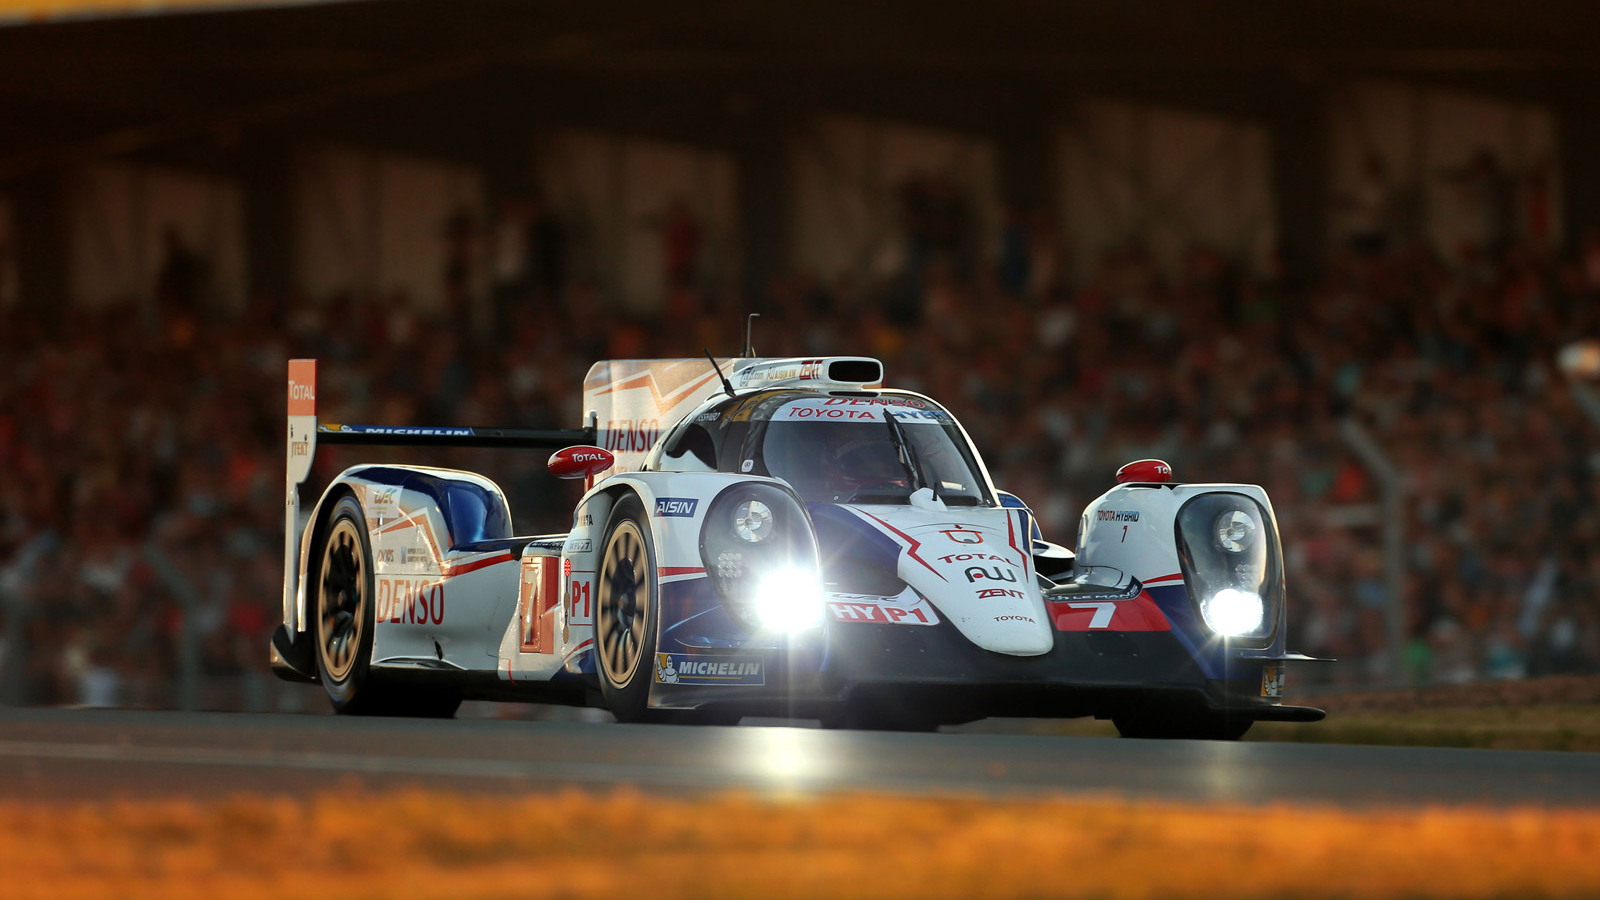 Toyota at the 2014 24 Hours of Le Mans